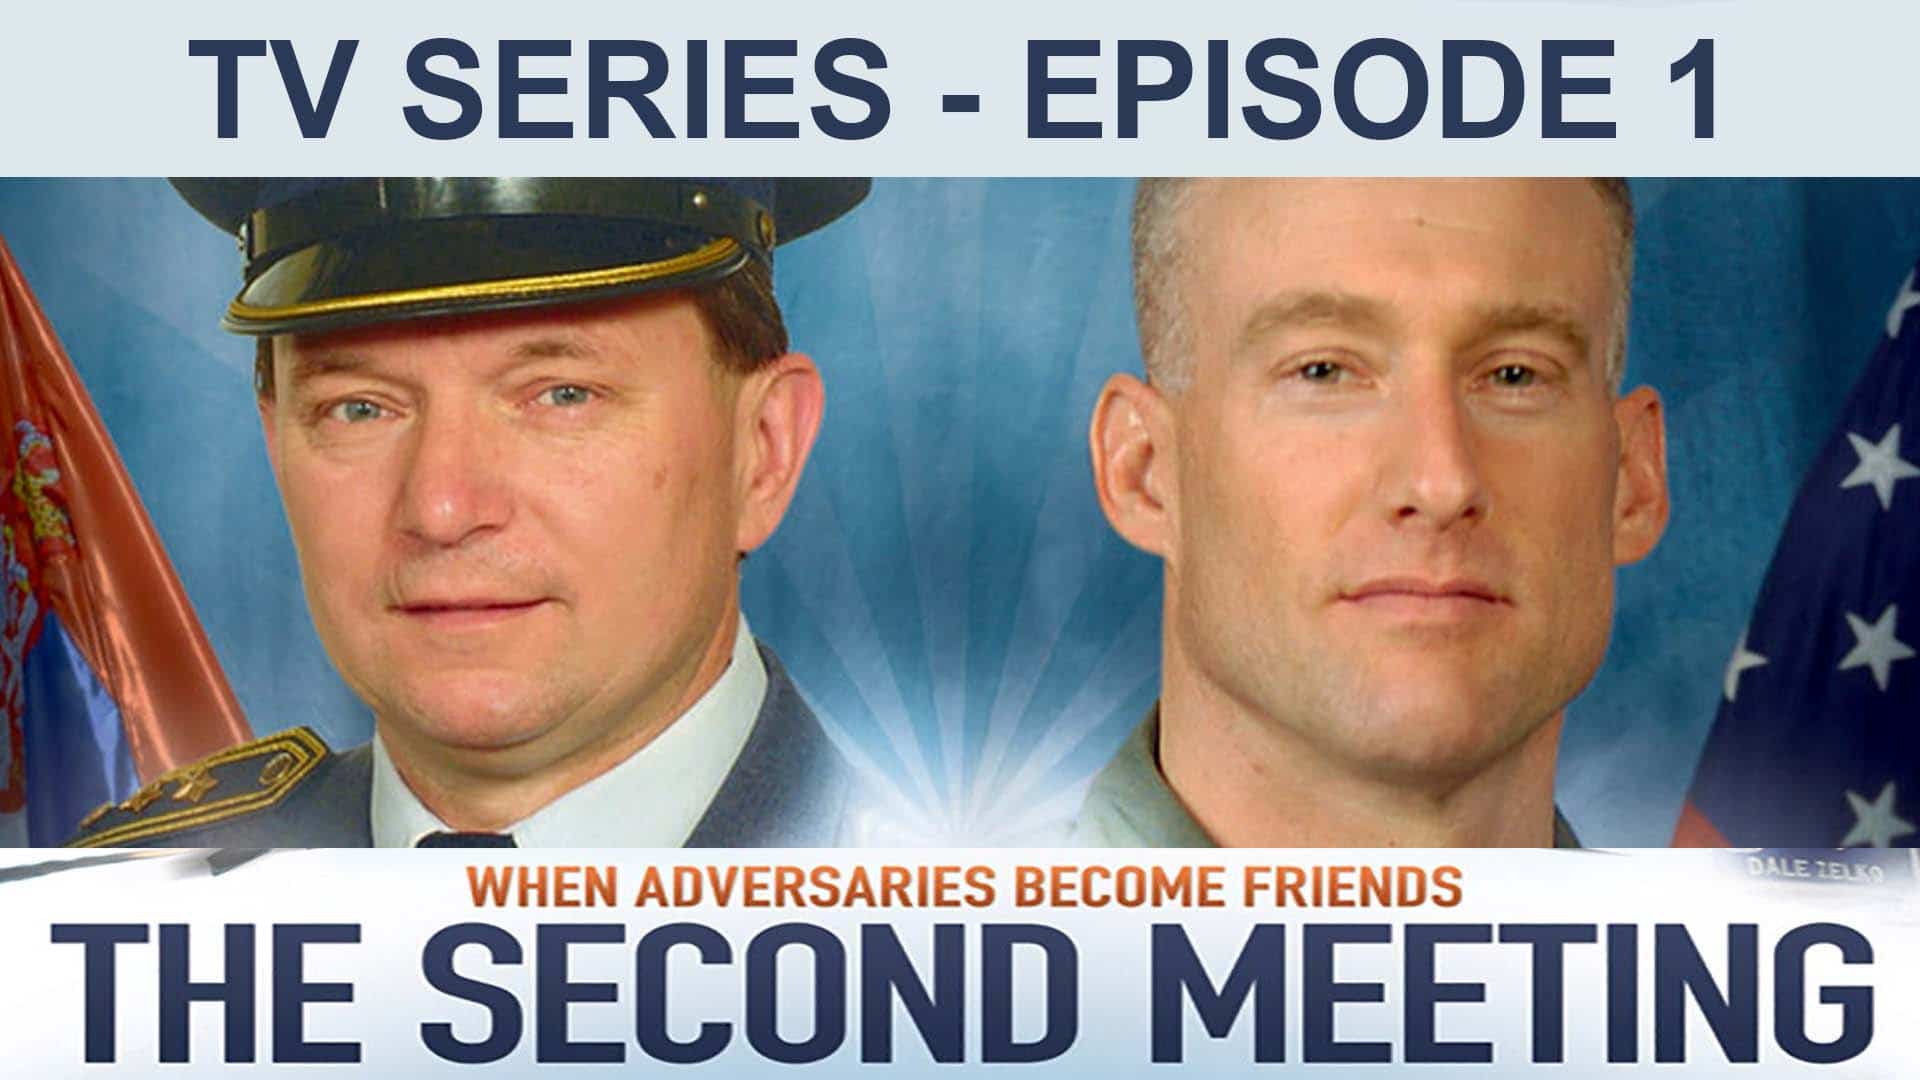 The Second Meeting TV Series Episode 1